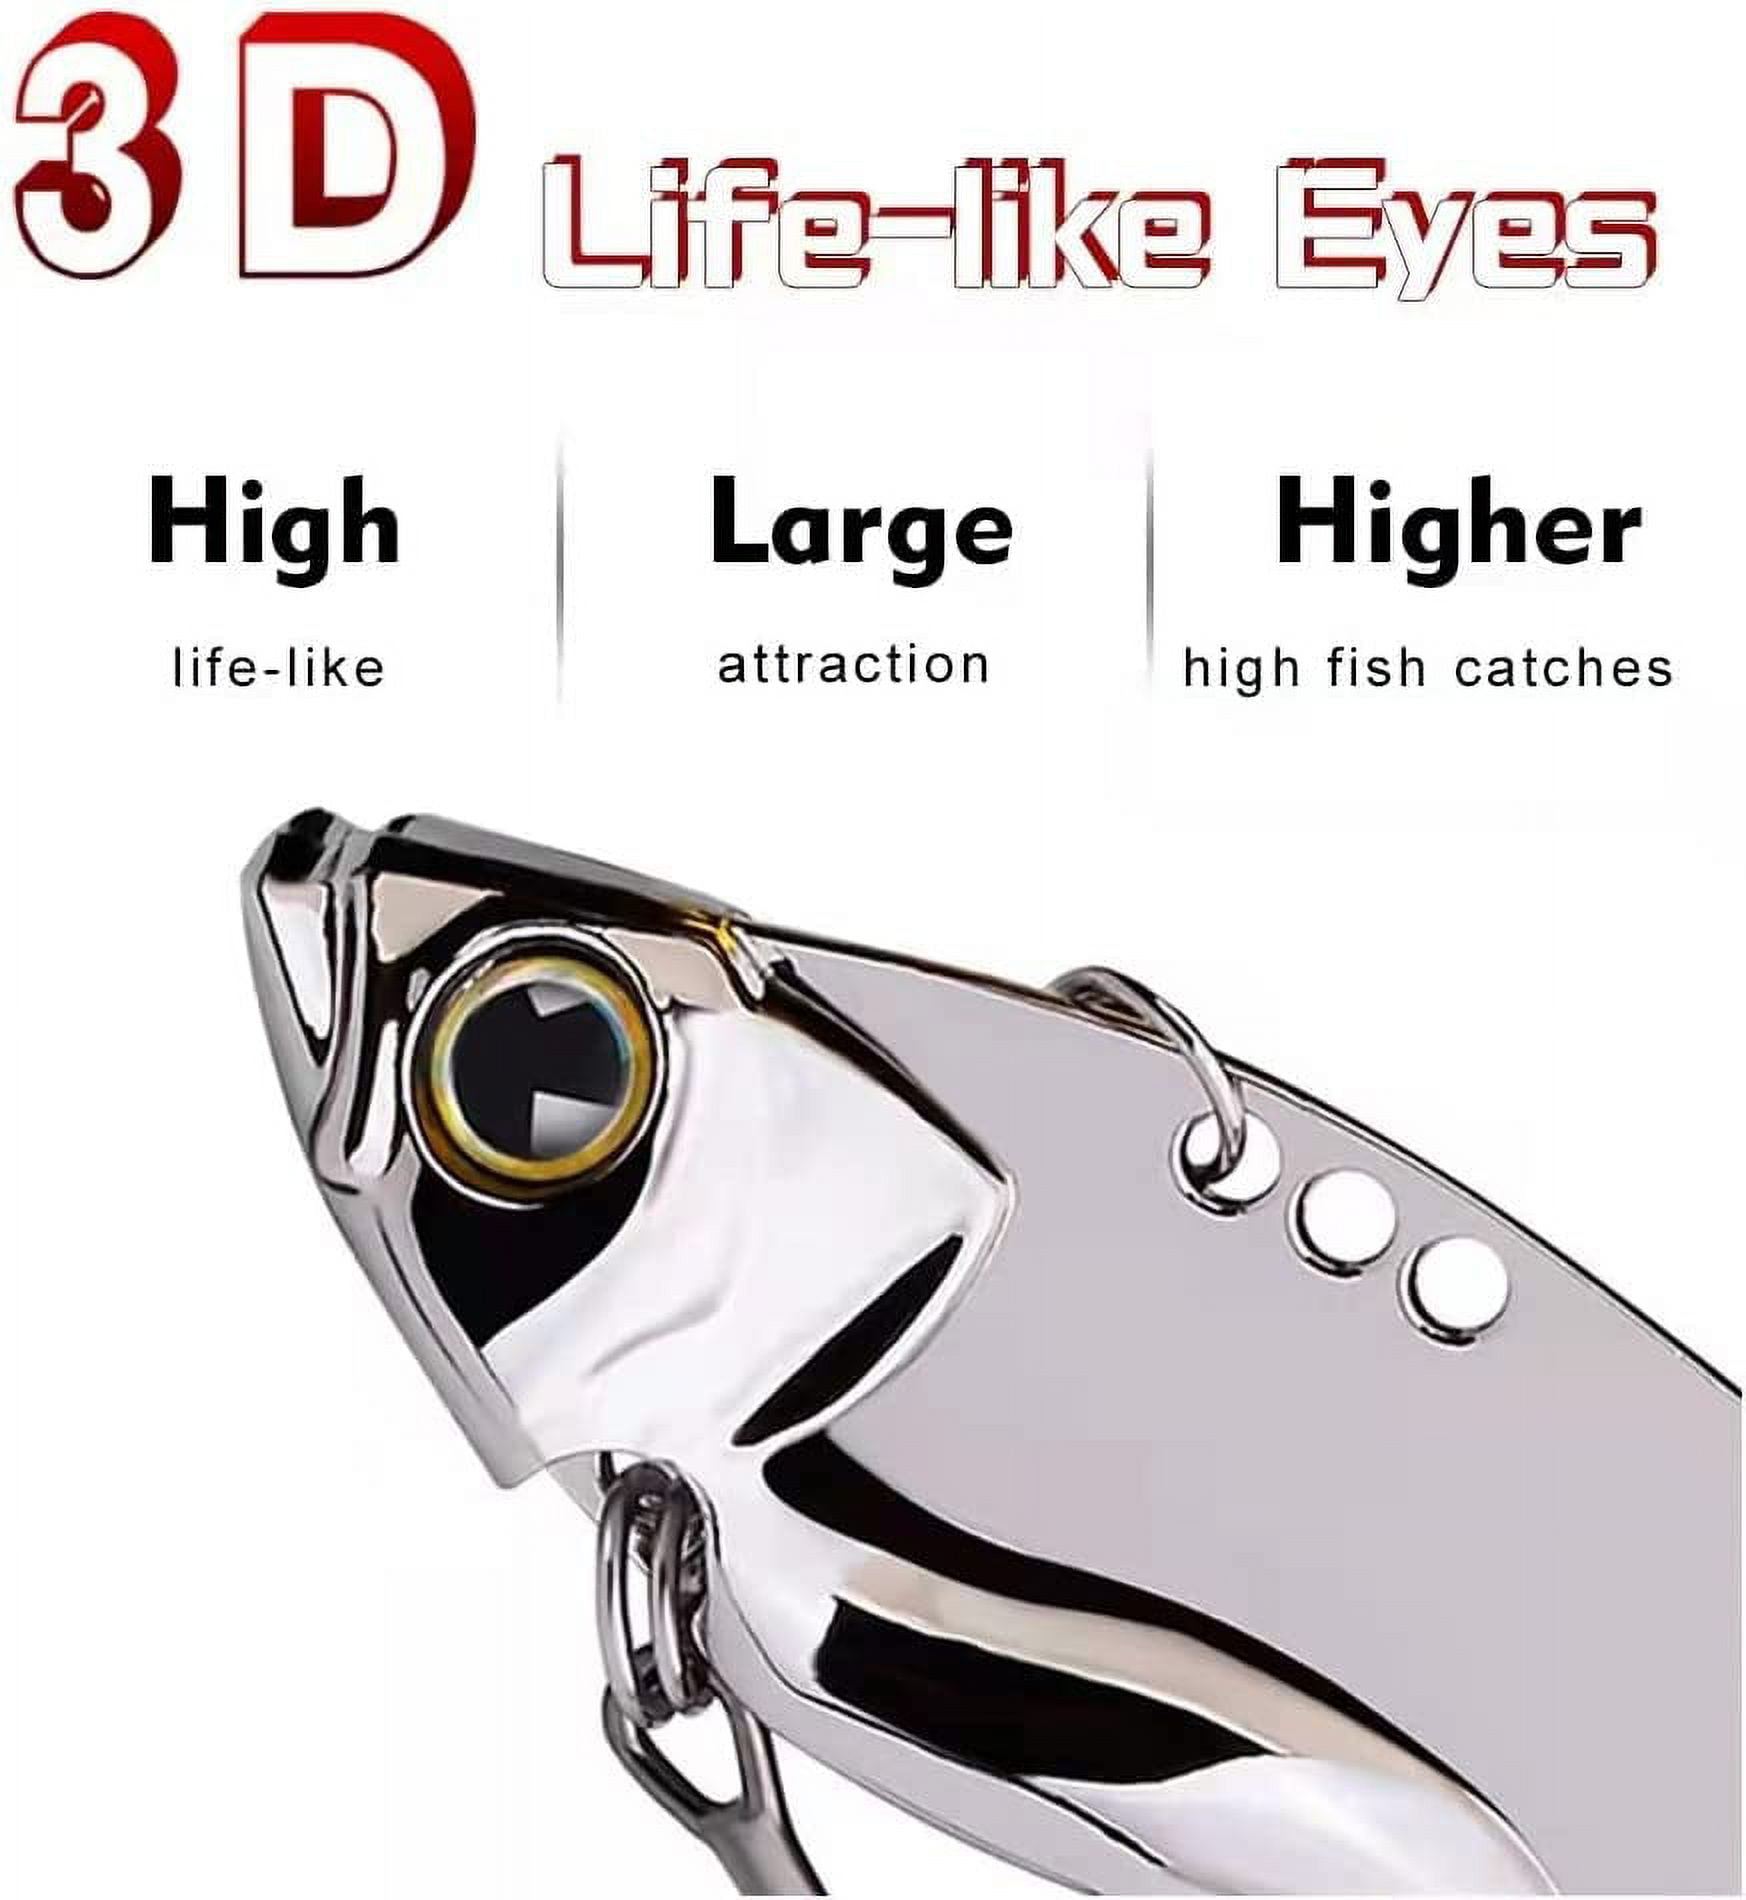 5PCS Blade Baits with Head Jig,5g Metal VIB Hard Blade Bait Fishing Spoon  Lures for Freshwater Saltwater Bass Walleyes Trout Crappie